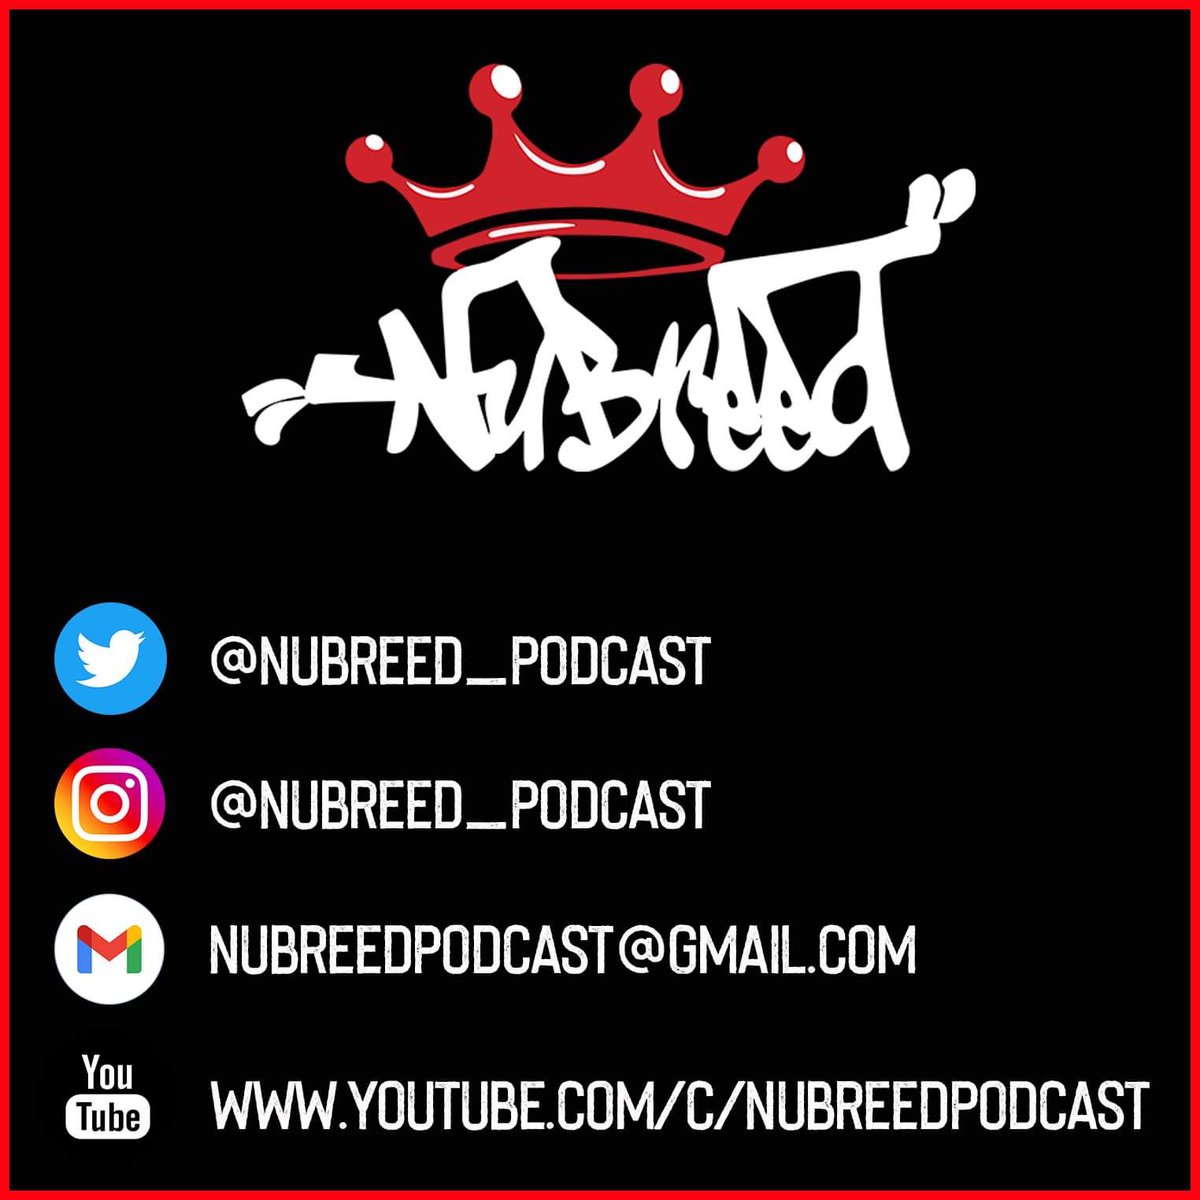 This is where you can find us on social media, YouTube and through email. 

New episodes every Wednesday at noon eastern. (audio and video)

New reaction vids every Friday at noon eastern only on YouTube. 

#youtube #poscast #numetalpodcast #metalpodcast #libsyn